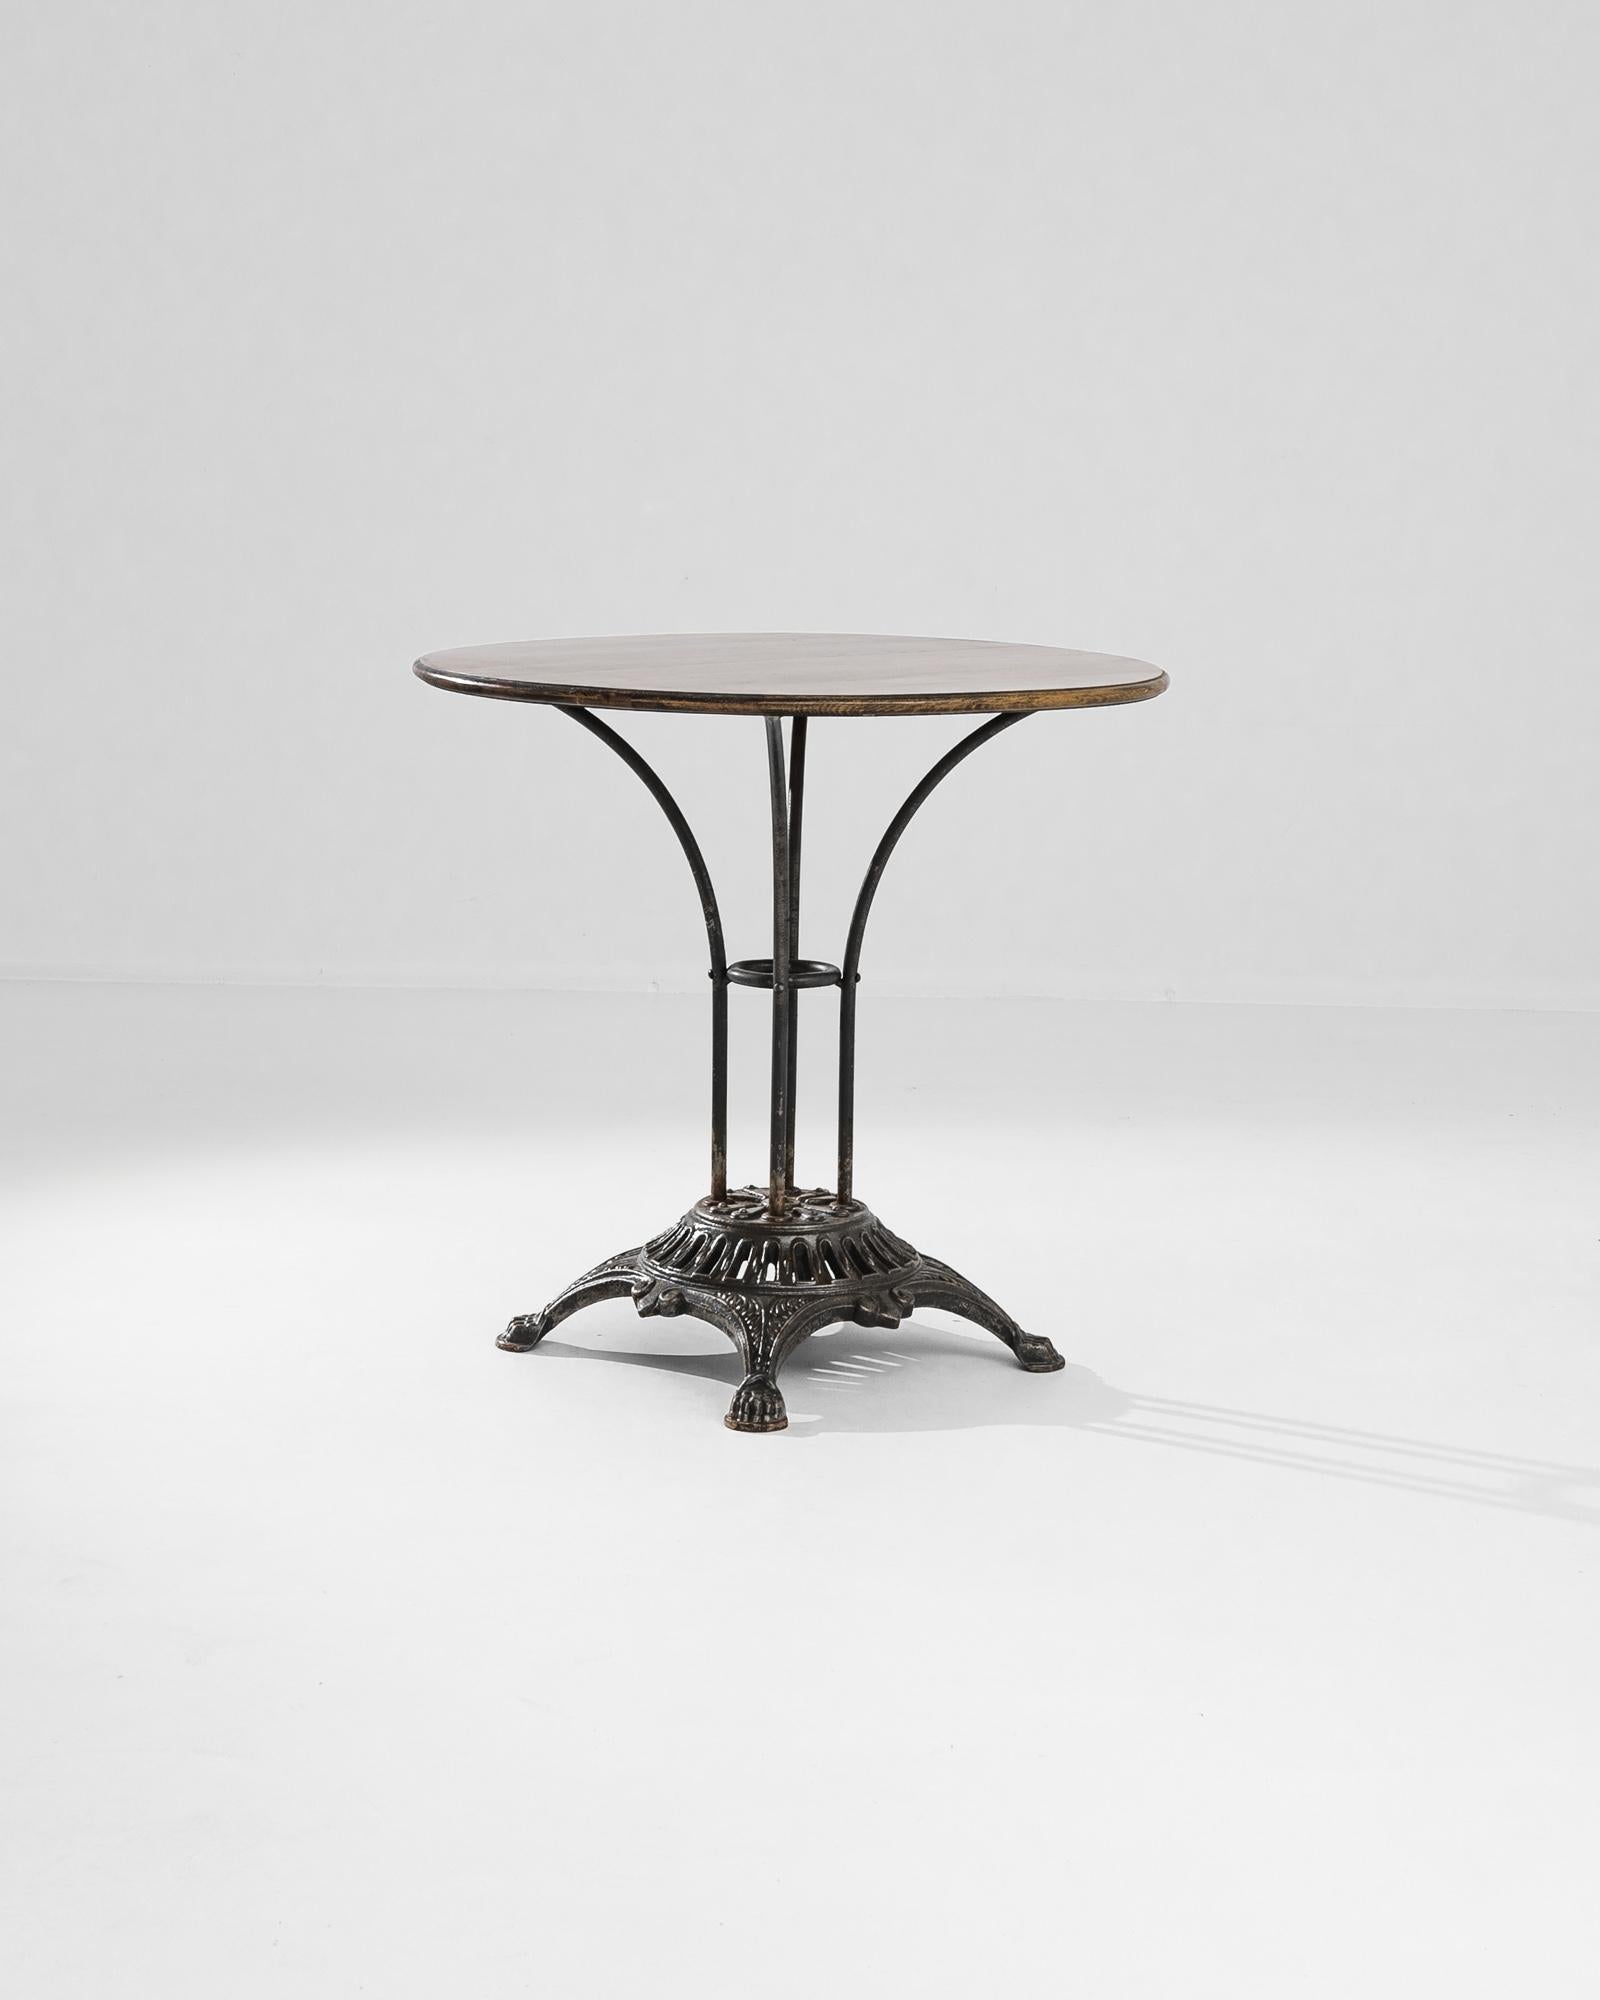 An elegant circular table from 1950s France. The polished wooden tabletop is elevated upon an arrangement of arched metal rods, set atop an elaborate cast-iron base — a bistro Silhouette with a distinguished twist. Paw feet gift a light-footed